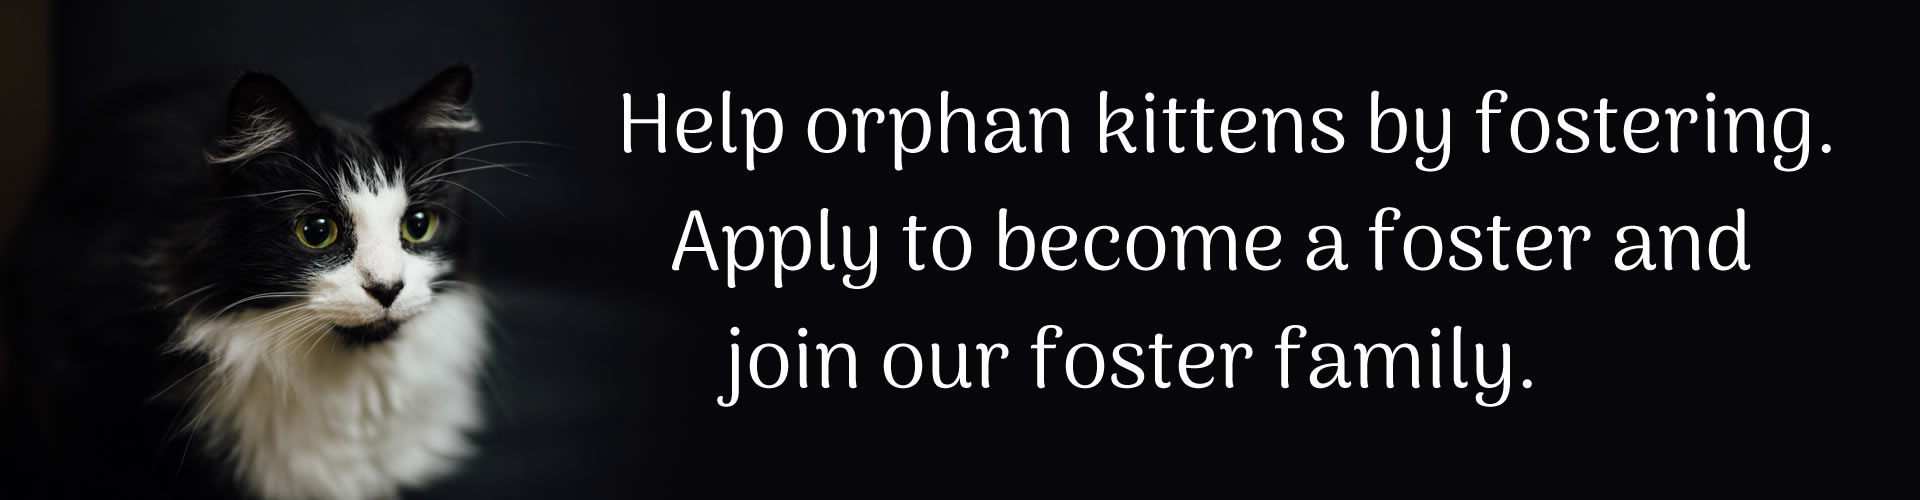 Help us save more cats from high-kill shelters. Adopt, foster, or make a tax-deductable donation.